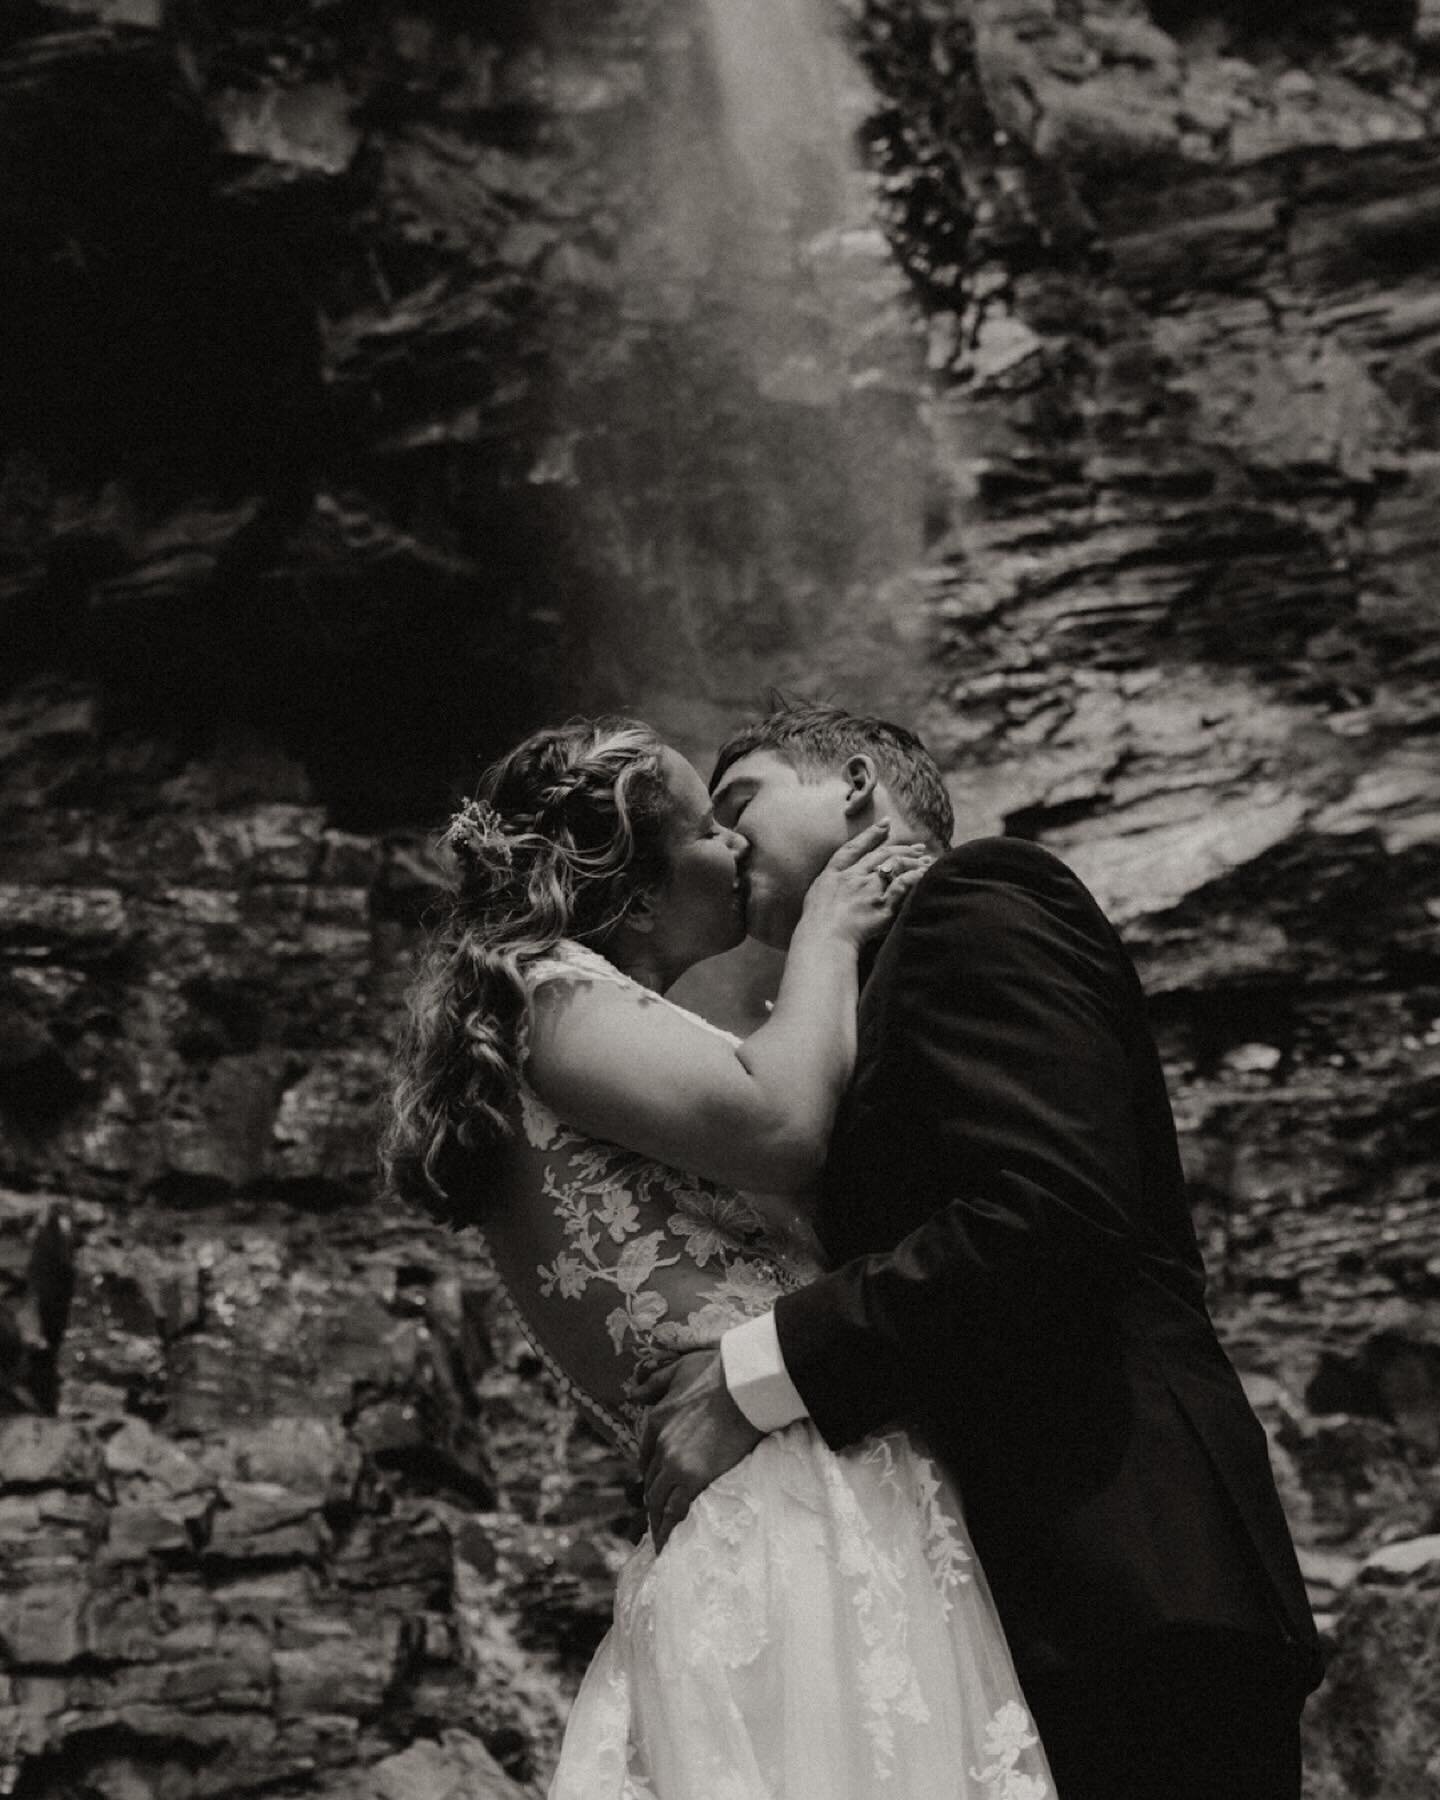 Ouray, CO is called the Switzerland of Colorado, and on Crystal and Logan&rsquo;s wedding day, we experienced so much of it! 

Their first look looking out over the mountains, then portraits throughout the mountainsides and under a waterfall &mdash; 